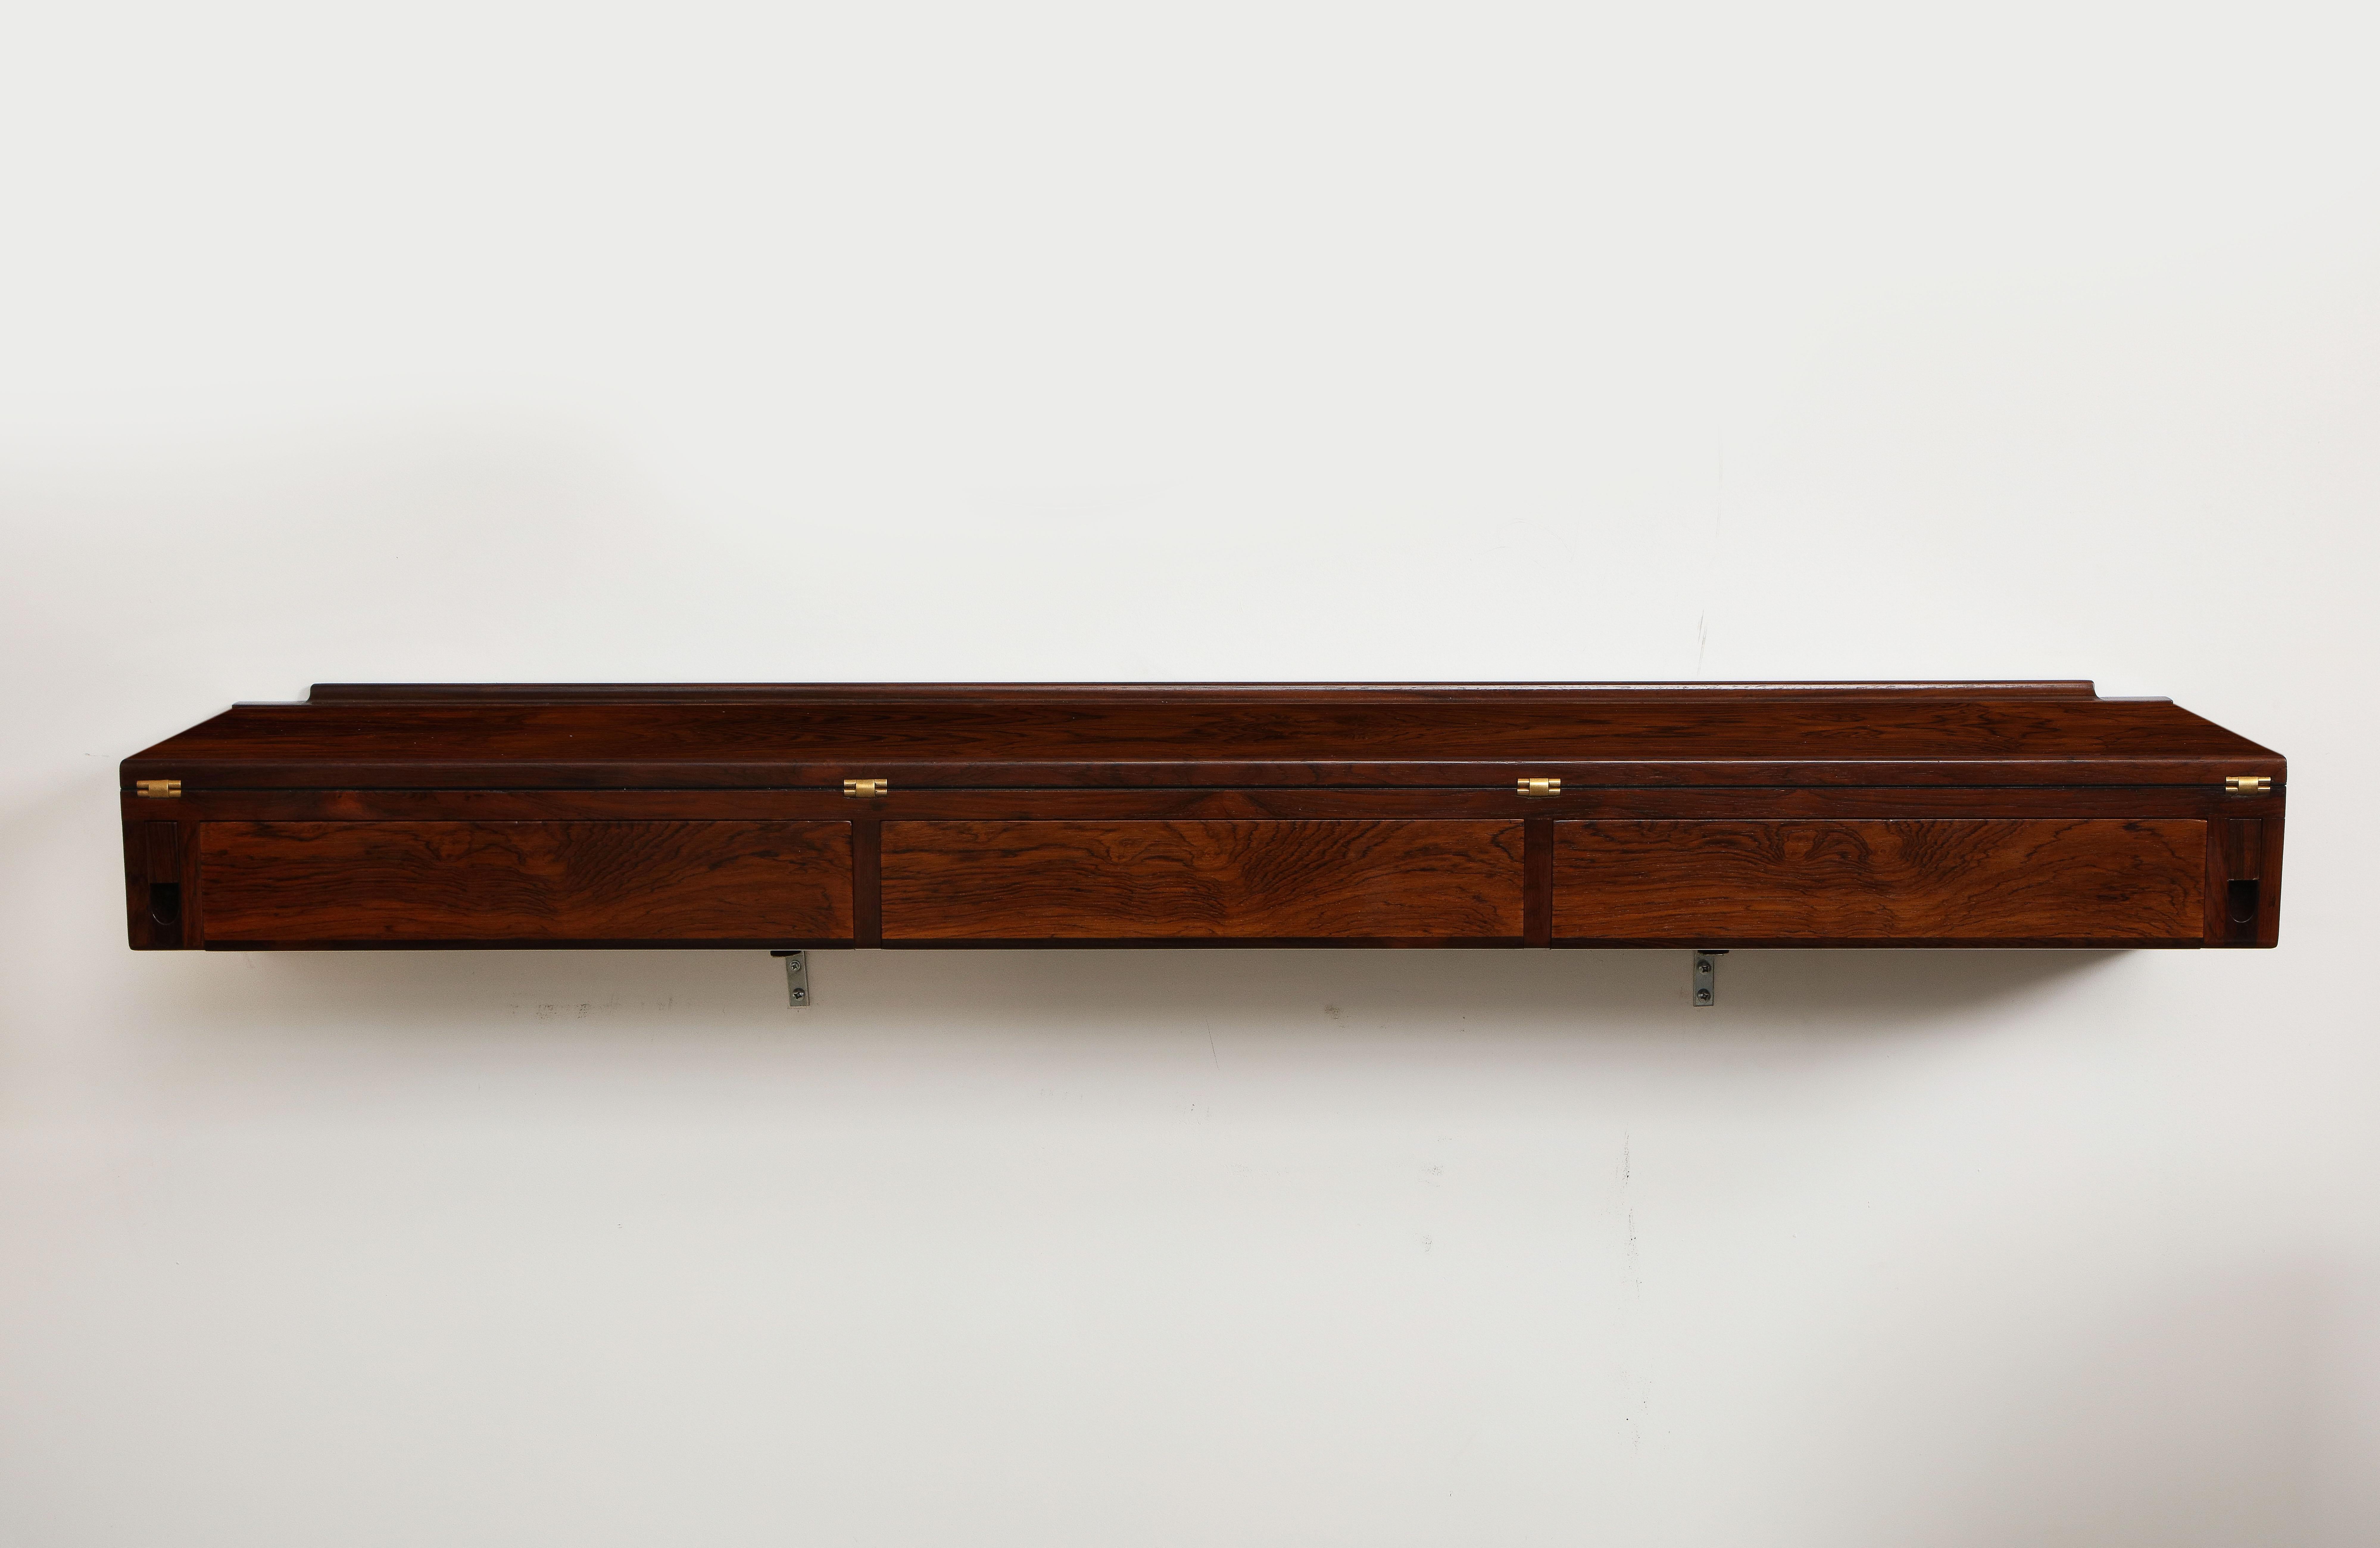 Stunning 1960's Mid-Century Modern rosewood wall-mounted desk designed by Arne Hovmand Olsen, with brass hardware and laminate flip top, fully restored with minor wear and patina due to age and use.